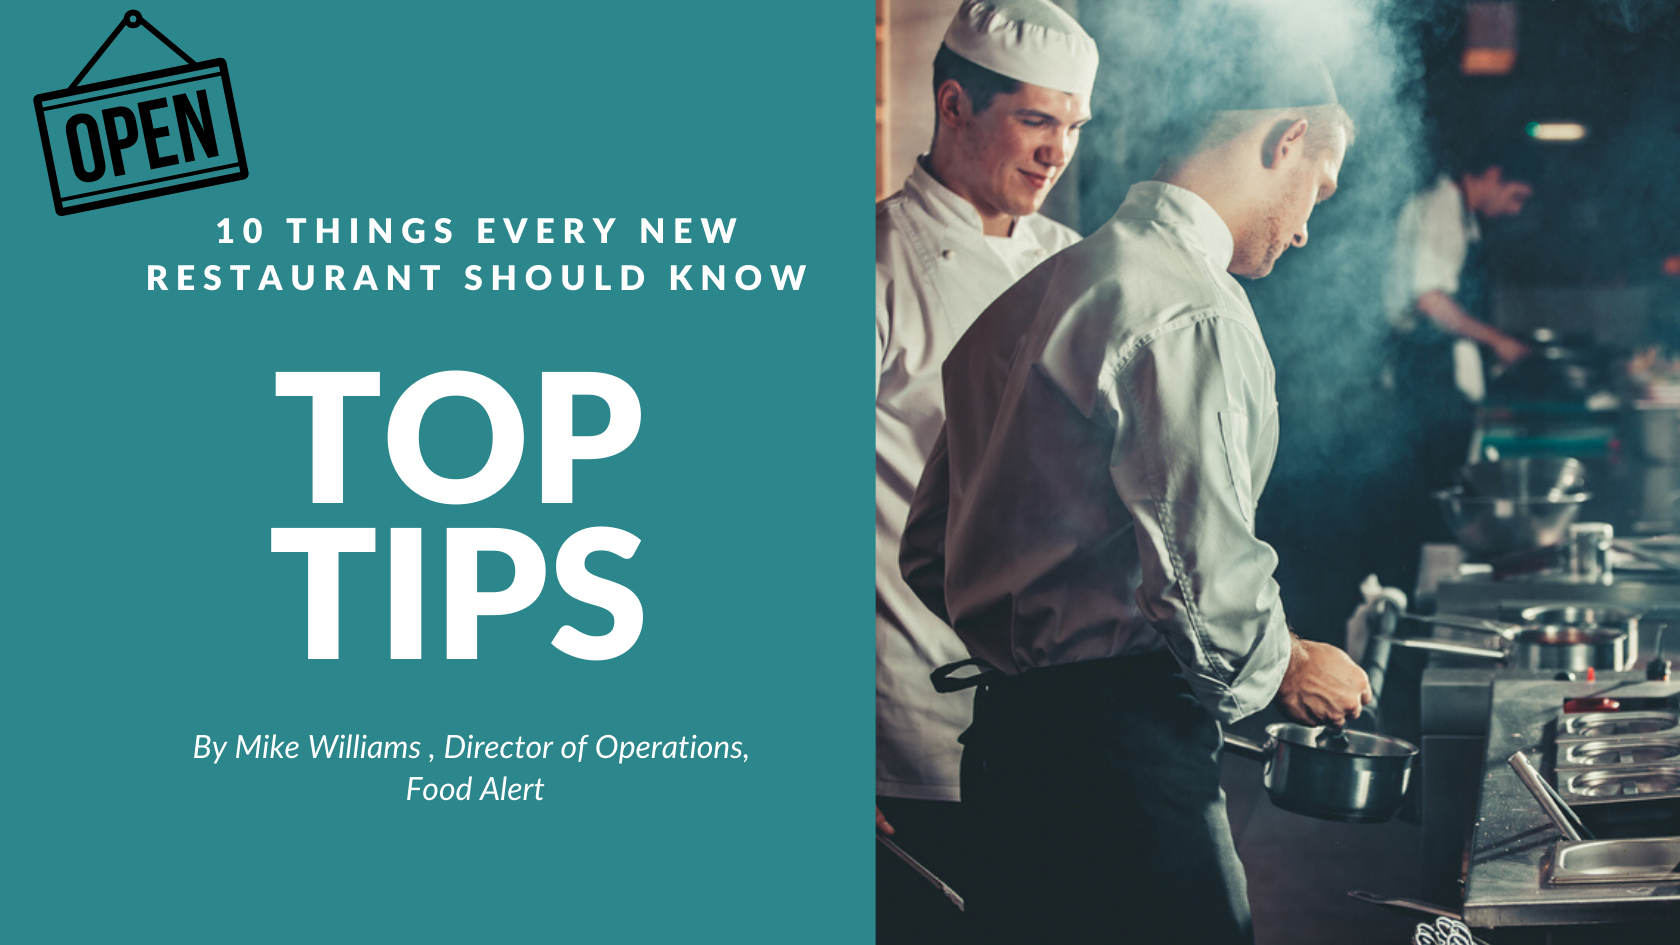 Ten things every new restaurant should know and do before opening